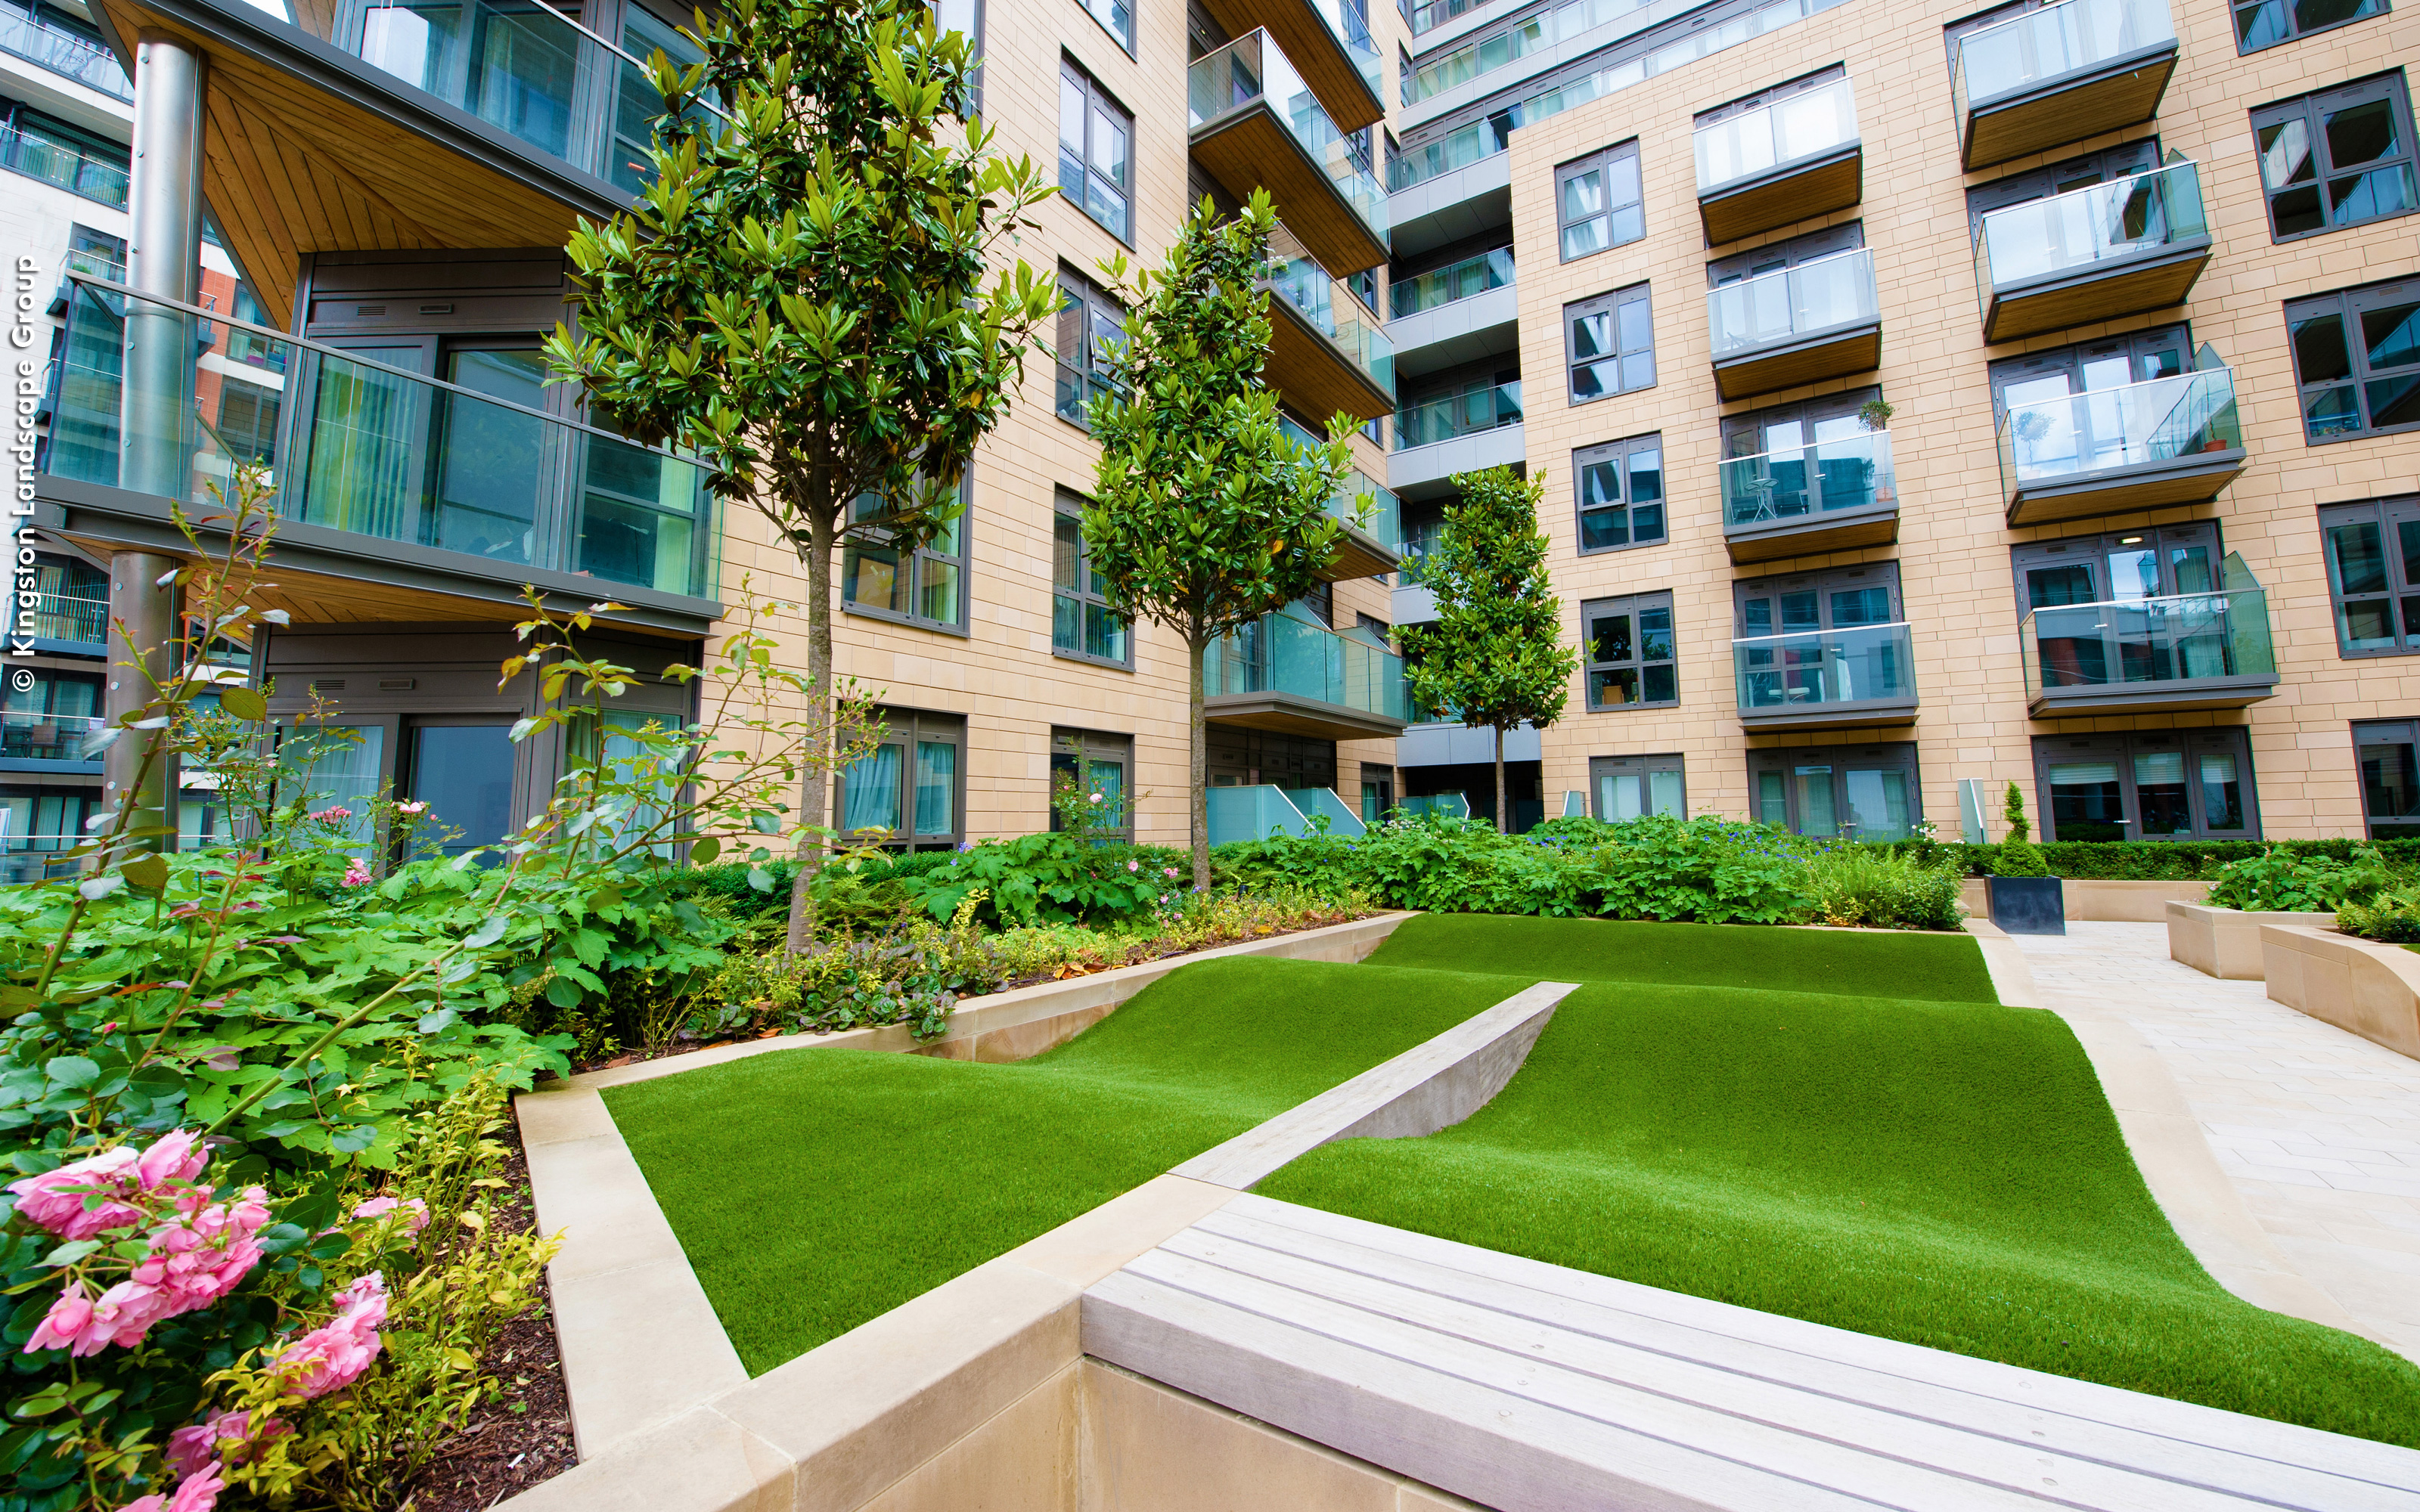 Courtyard with rolling mounds made from grass surrounded by residential blocks